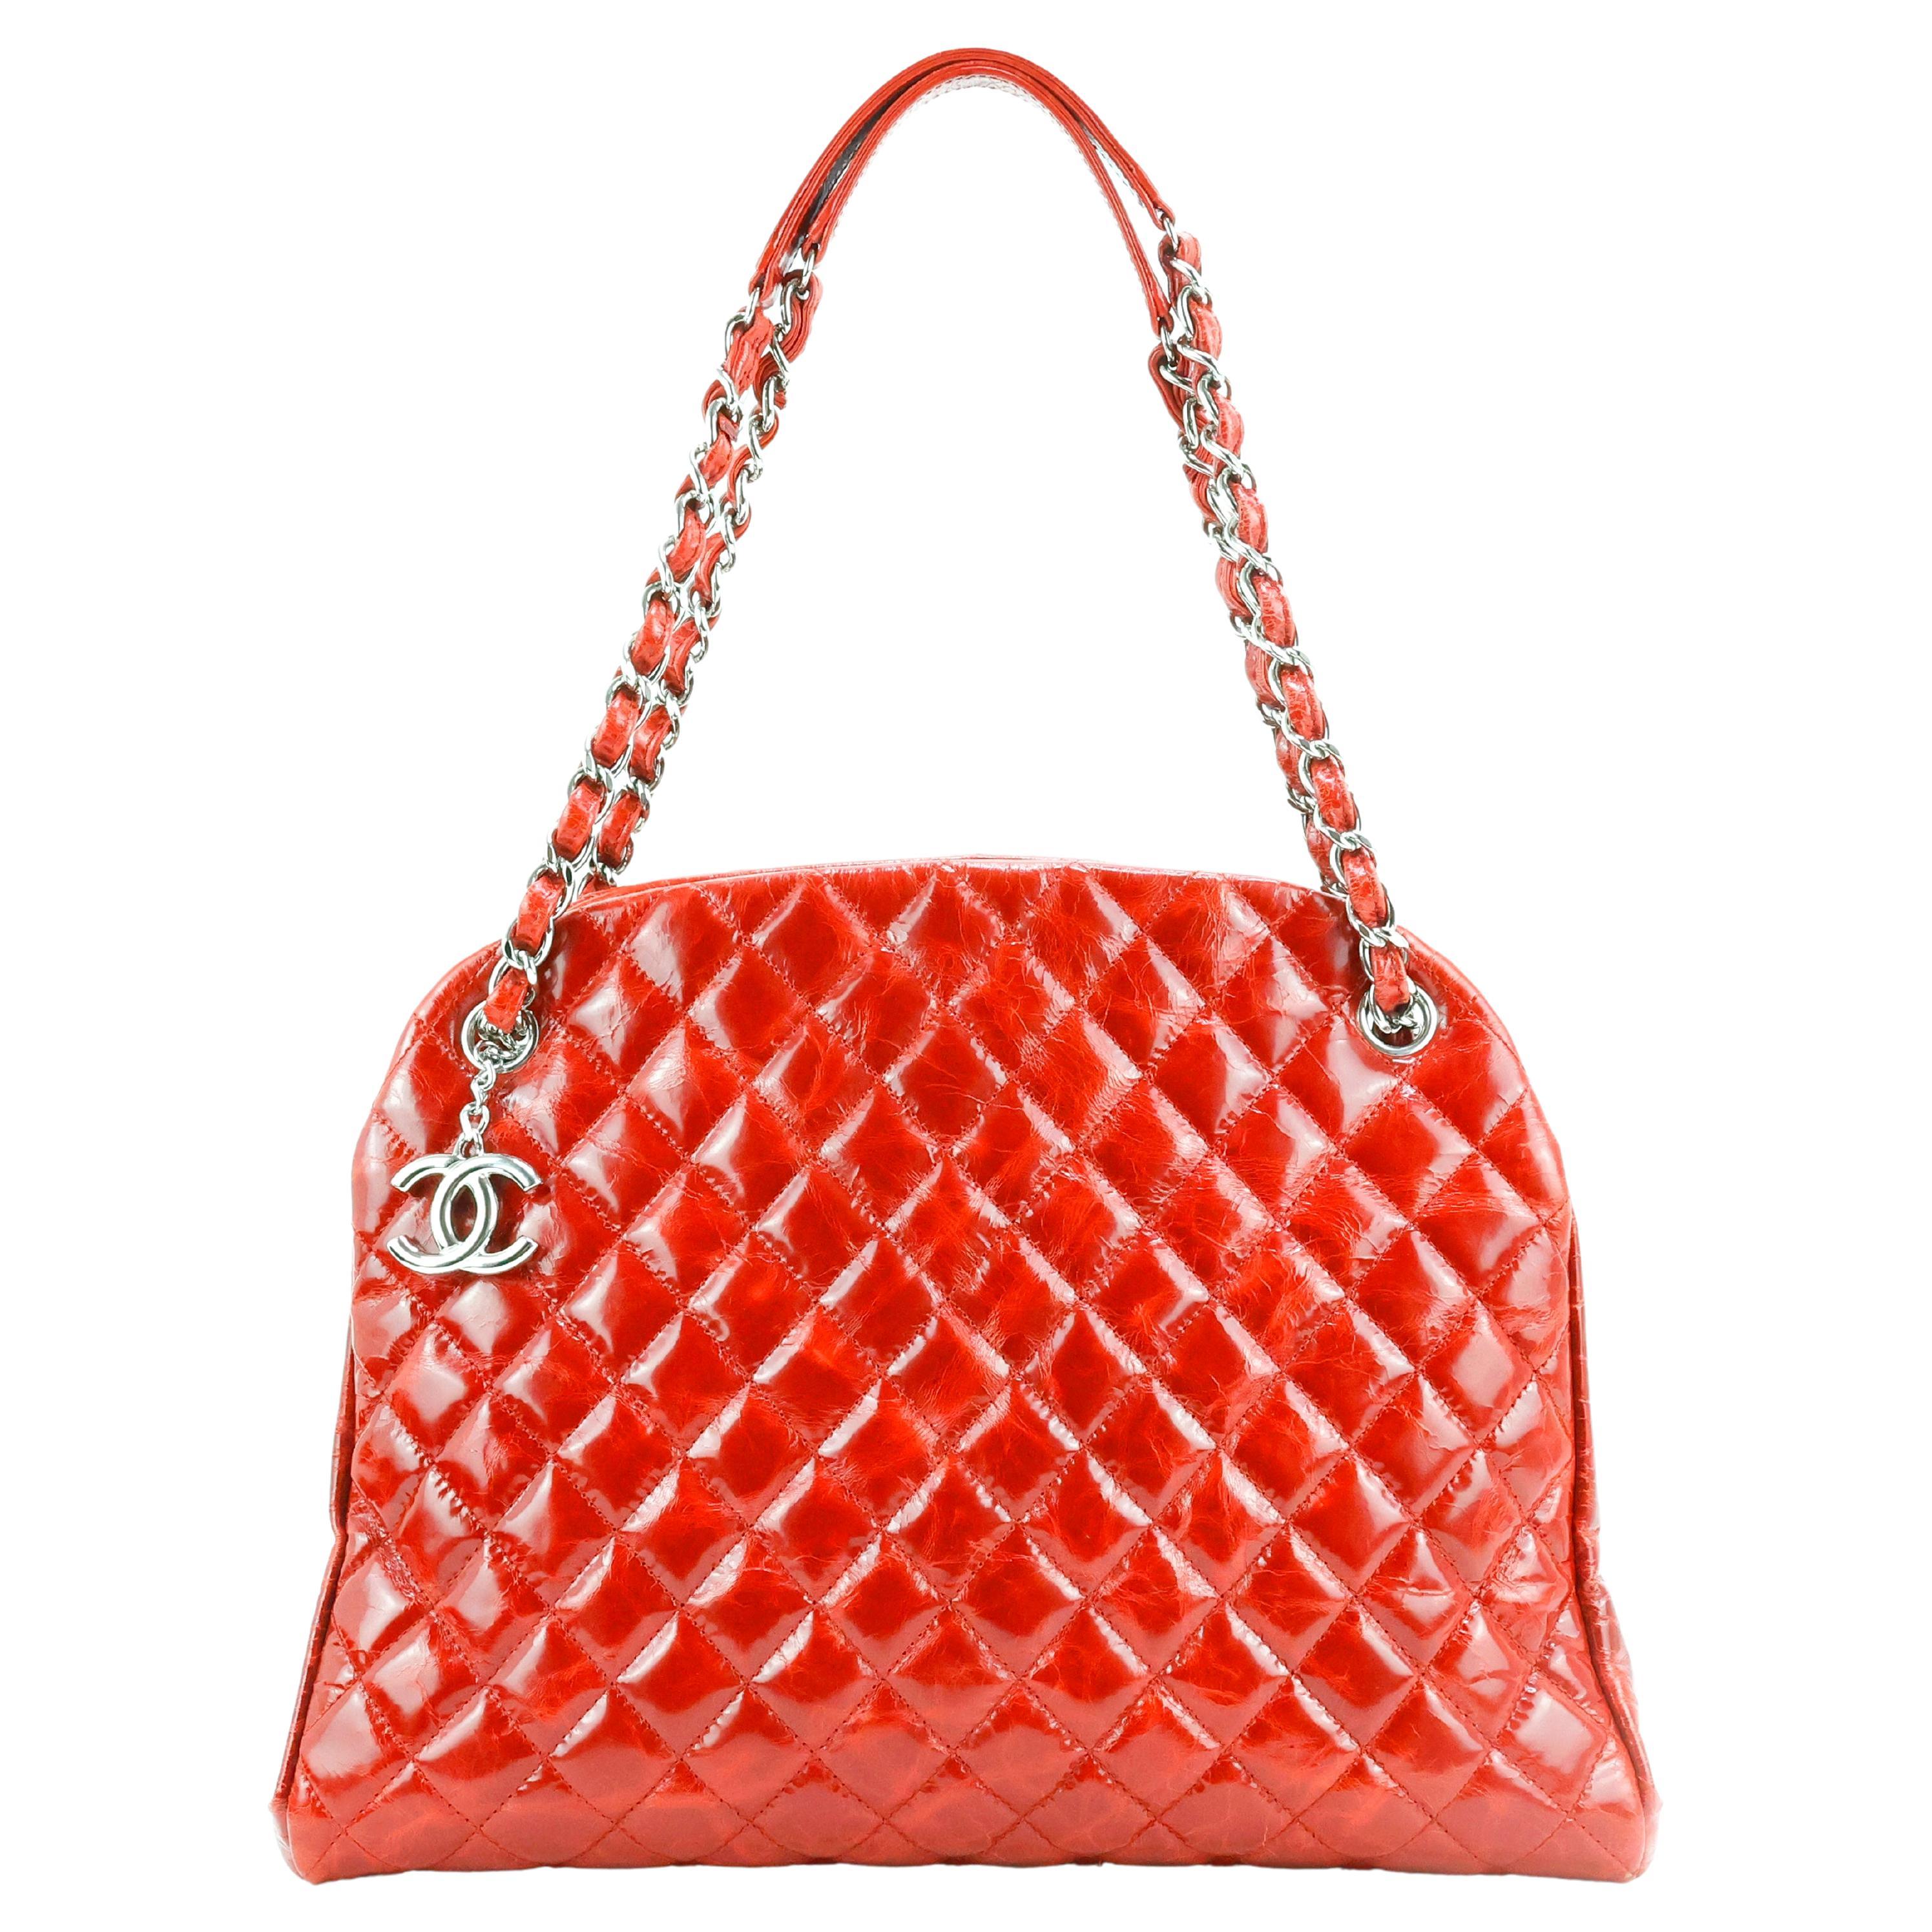 Chanel Bag in red quilted leather For Sale